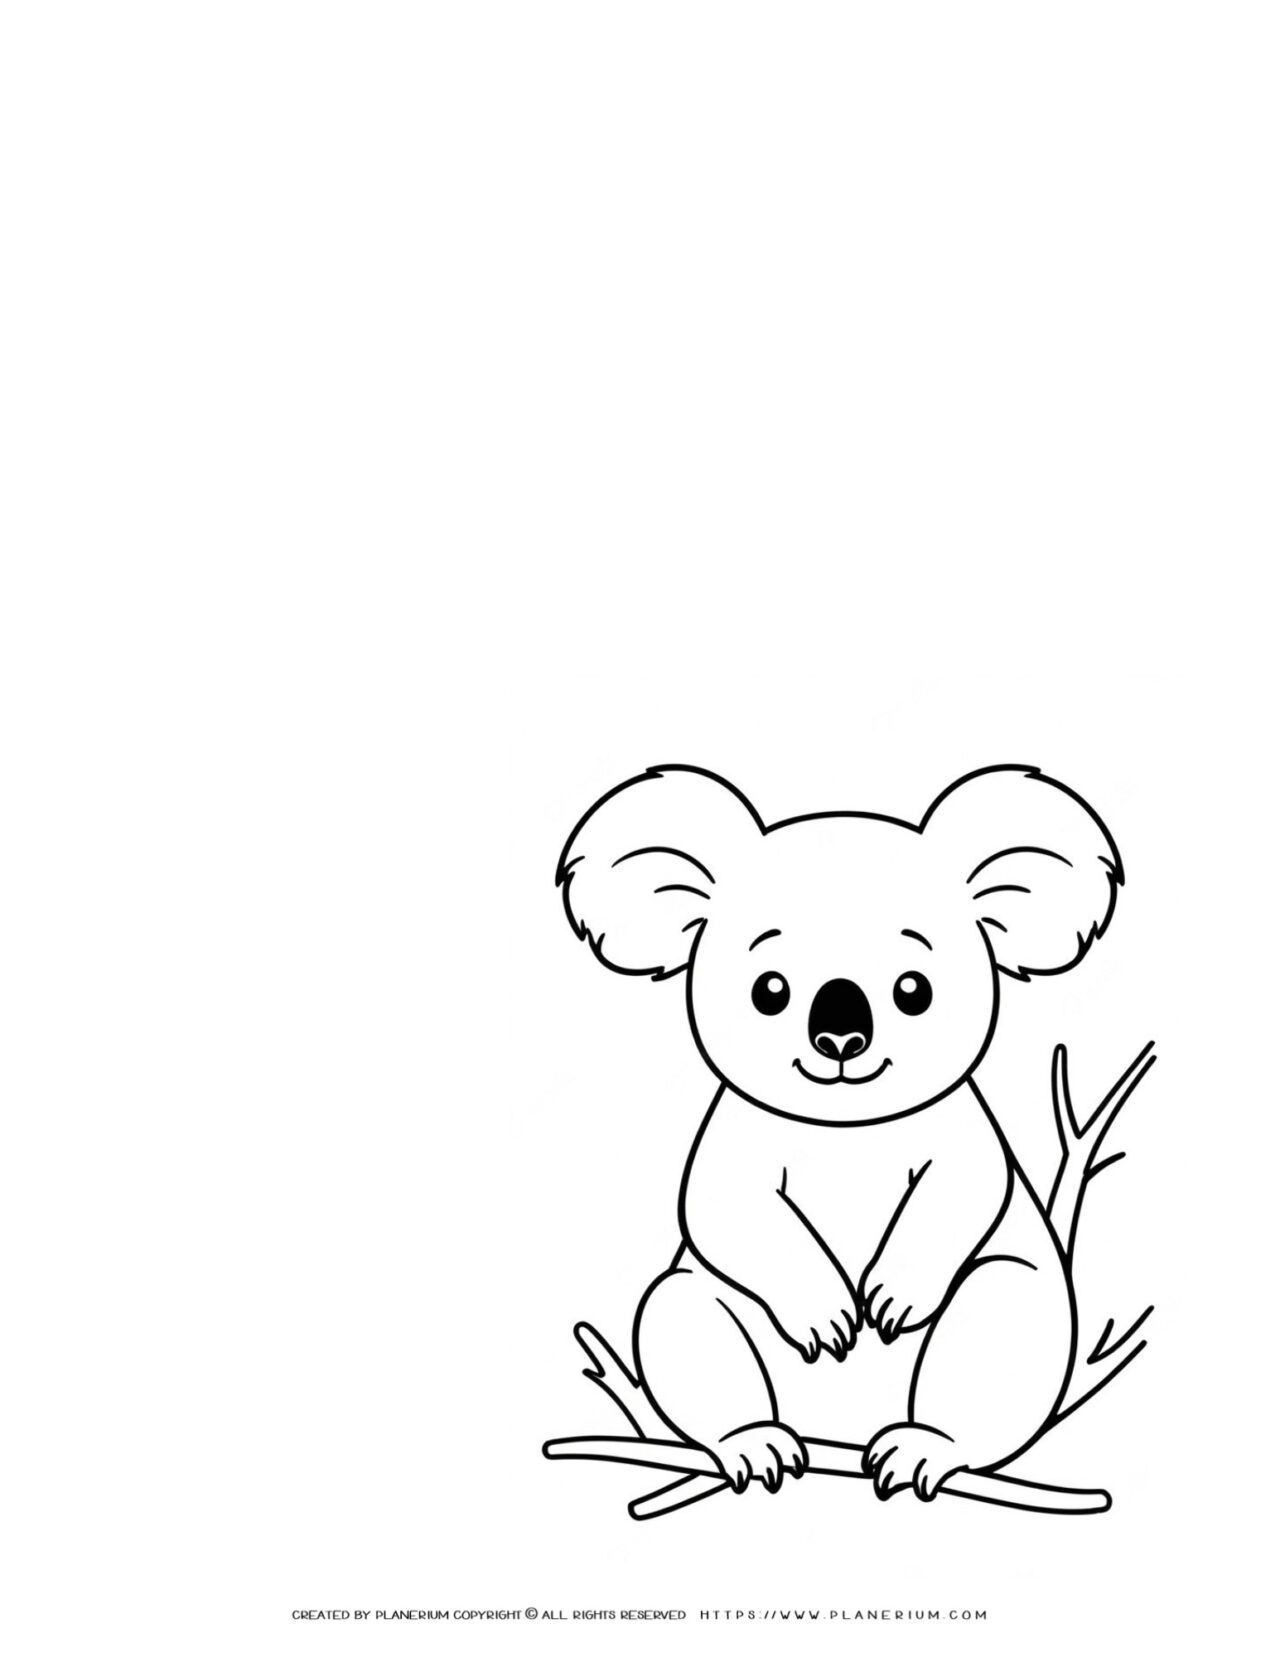 koala-sitting-on-a-branch-writing-and-coloring-page-for-kids